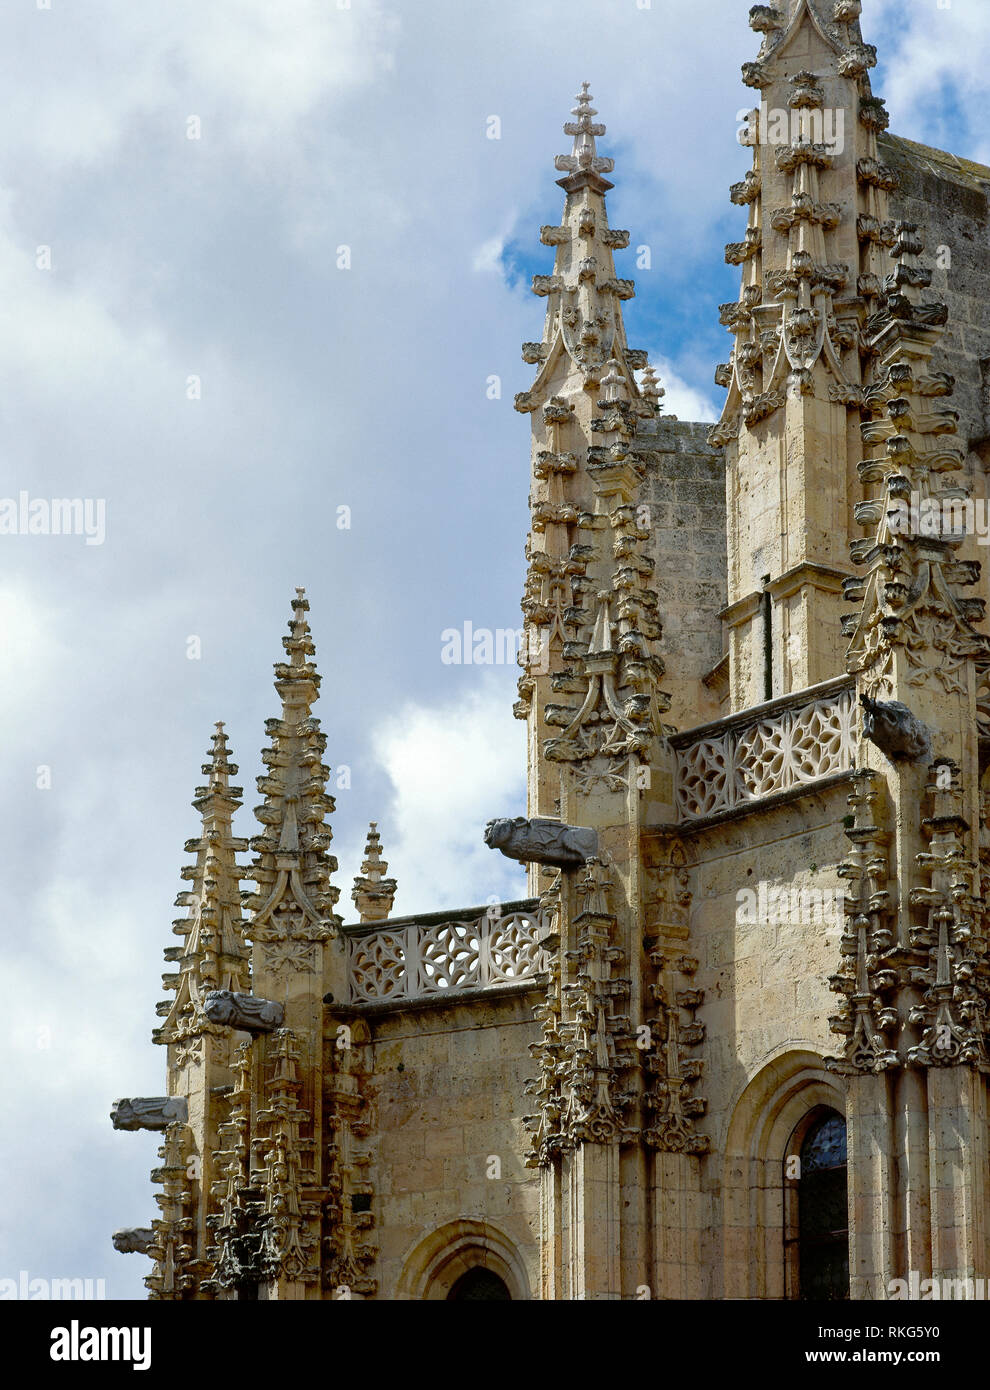 Spain, Castile and Leon, Segovia. The Cathedral,1525-1577. Late Gothic style. Architect: Juan Gil de Hontañon. It was continued by his son Rodrigo Gil de Hontañon. Detail of the pinnacles and gargoyles of the exterior. Stock Photo